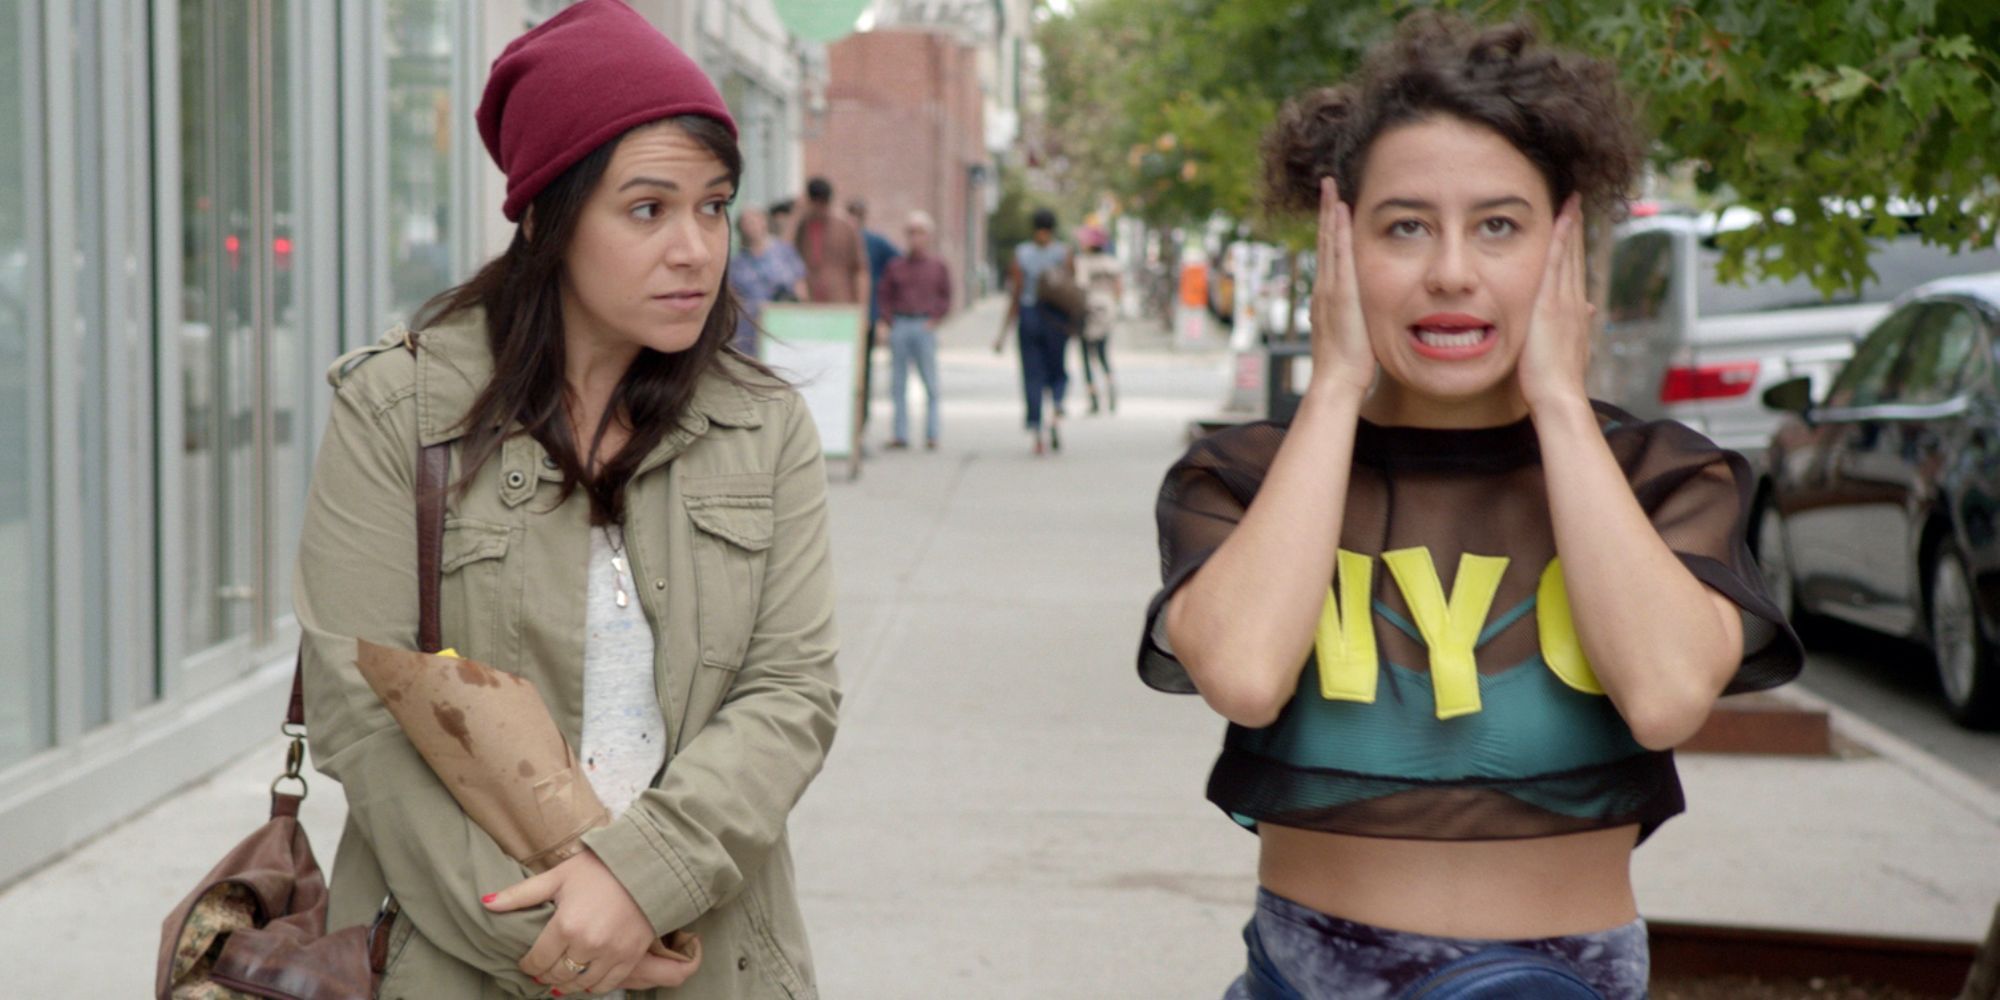 Abbi and Ilana walking down the street in Broad City.